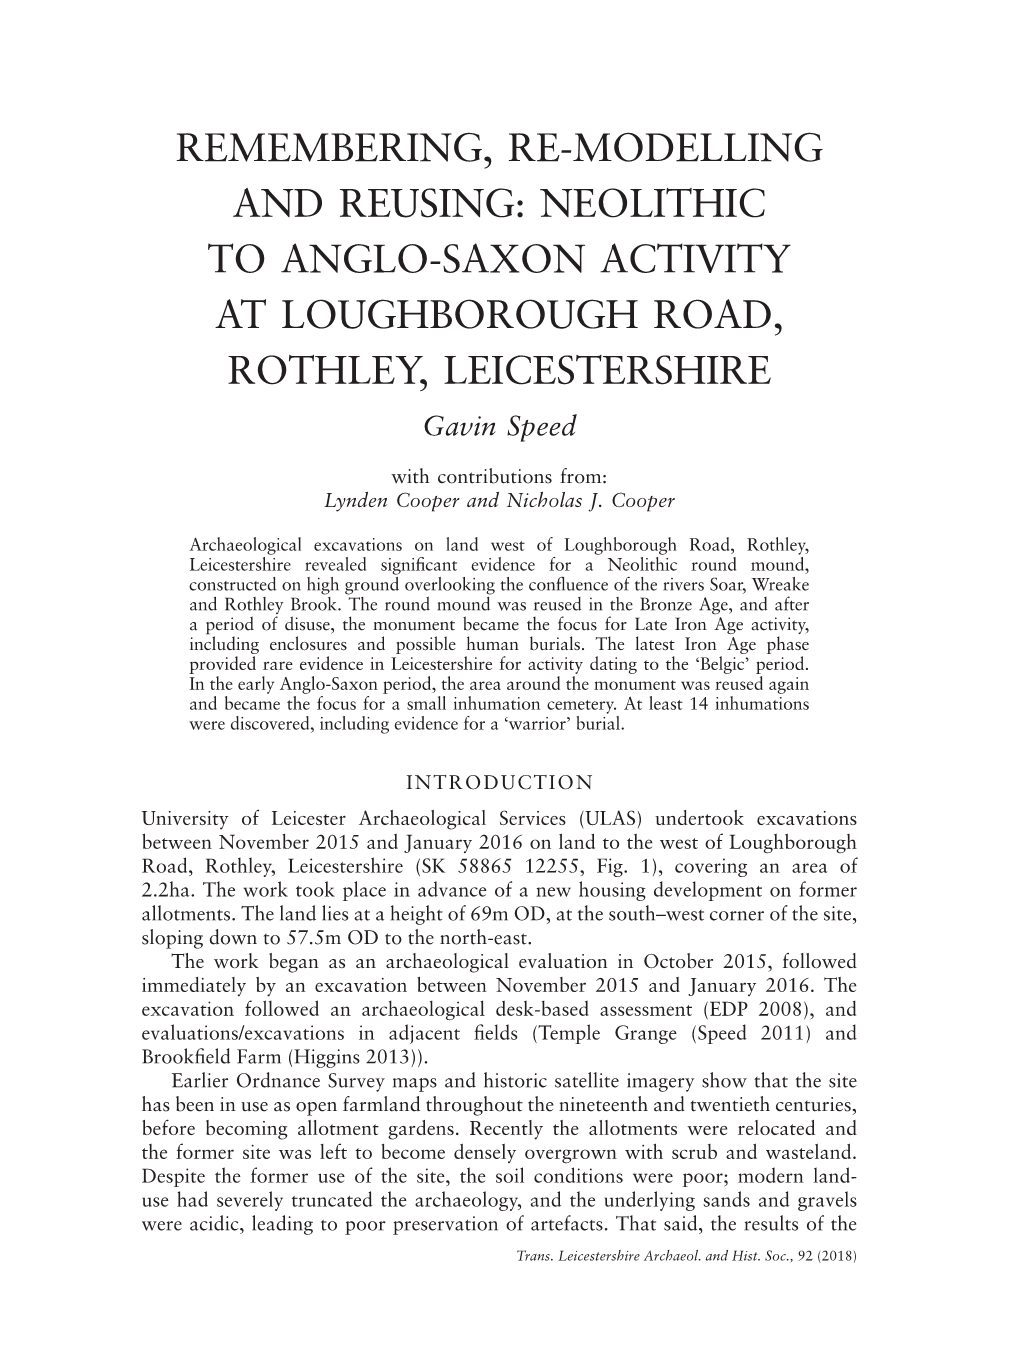 NEOLITHIC to ANGLO-SAXON ACTIVITY at LOUGHBOROUGH ROAD, ROTHLEY, LEICESTERSHIRE Gavin Speed